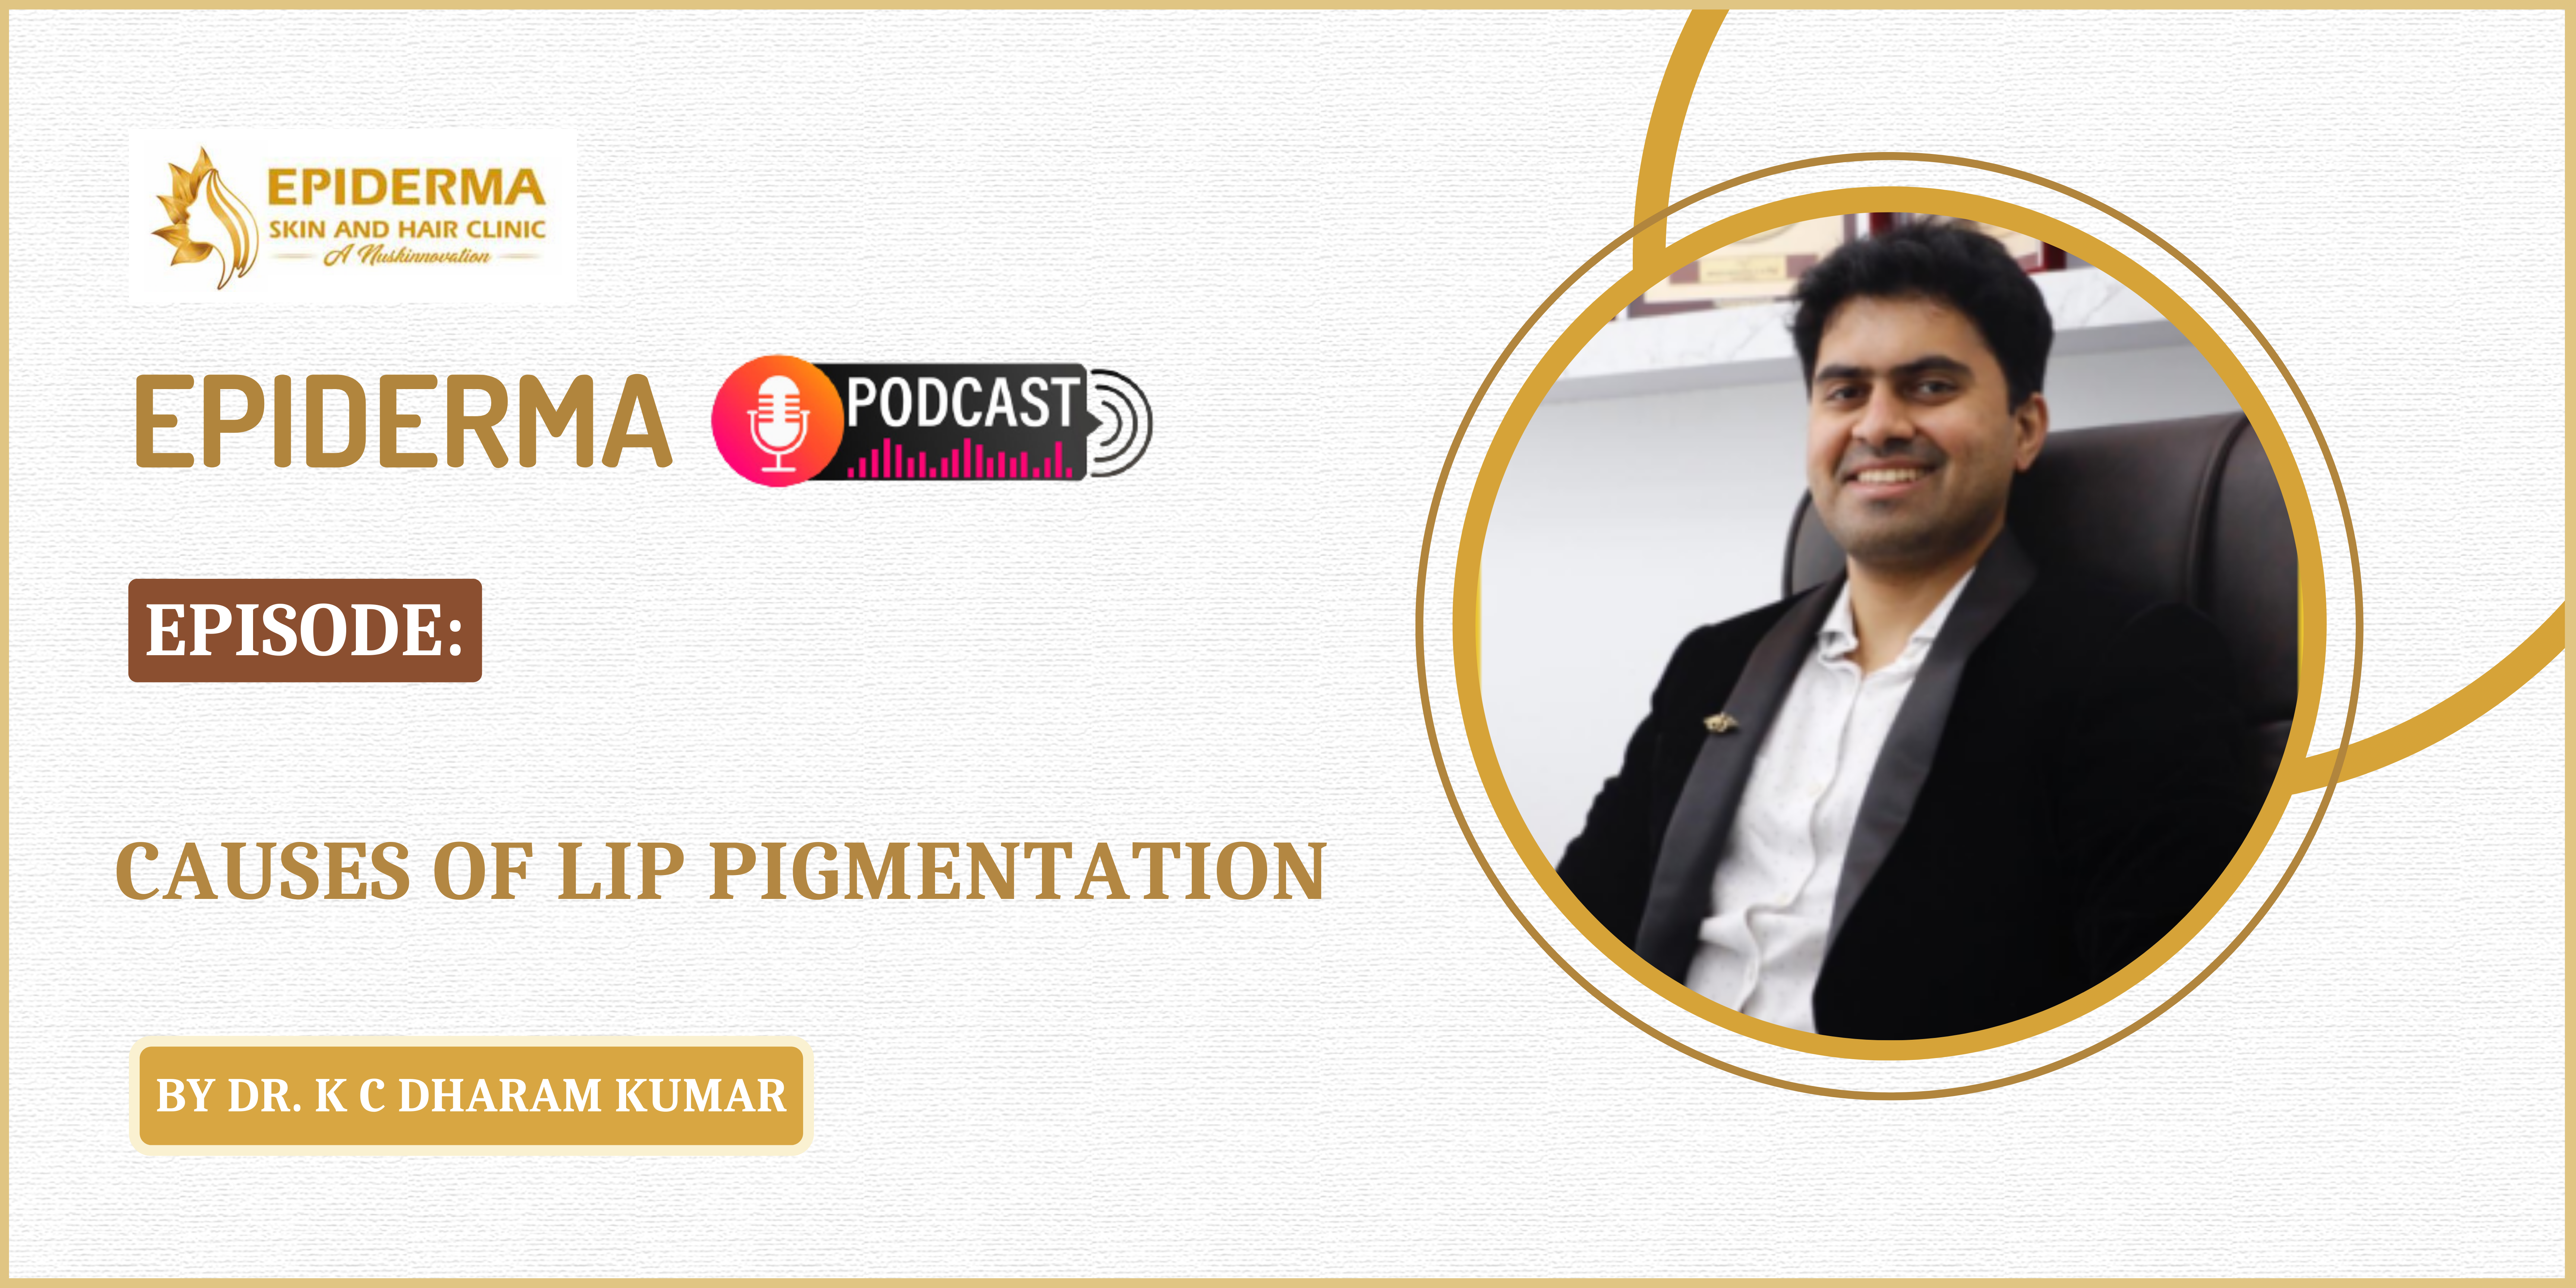 Podcast - Causes of Lip pigmentation | Skin Clinic Jayanagar | Epiderma Skin and Hair Clinic